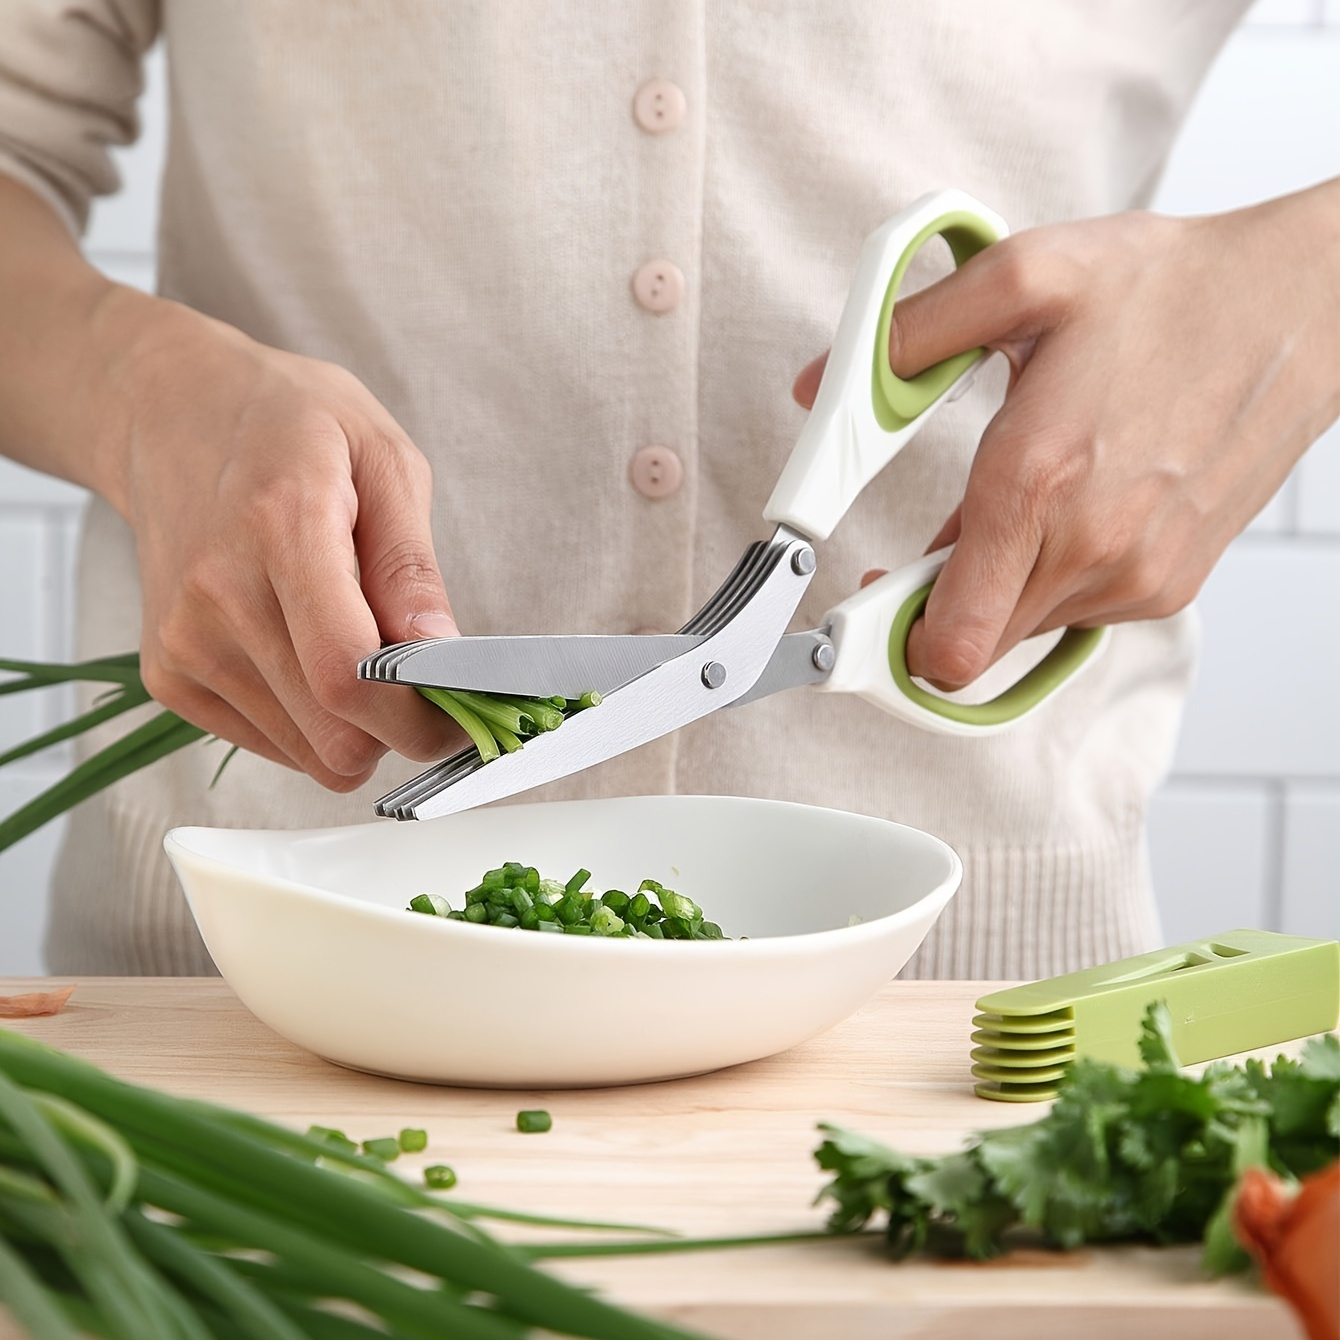 5 Blade Kitchen Salad Scissors, Multi-Blade Herb Scissors Multi-Layers  Kitchen Cutting Scissors, Stainless Steel Vegetable Cutting Tool with Cover  and